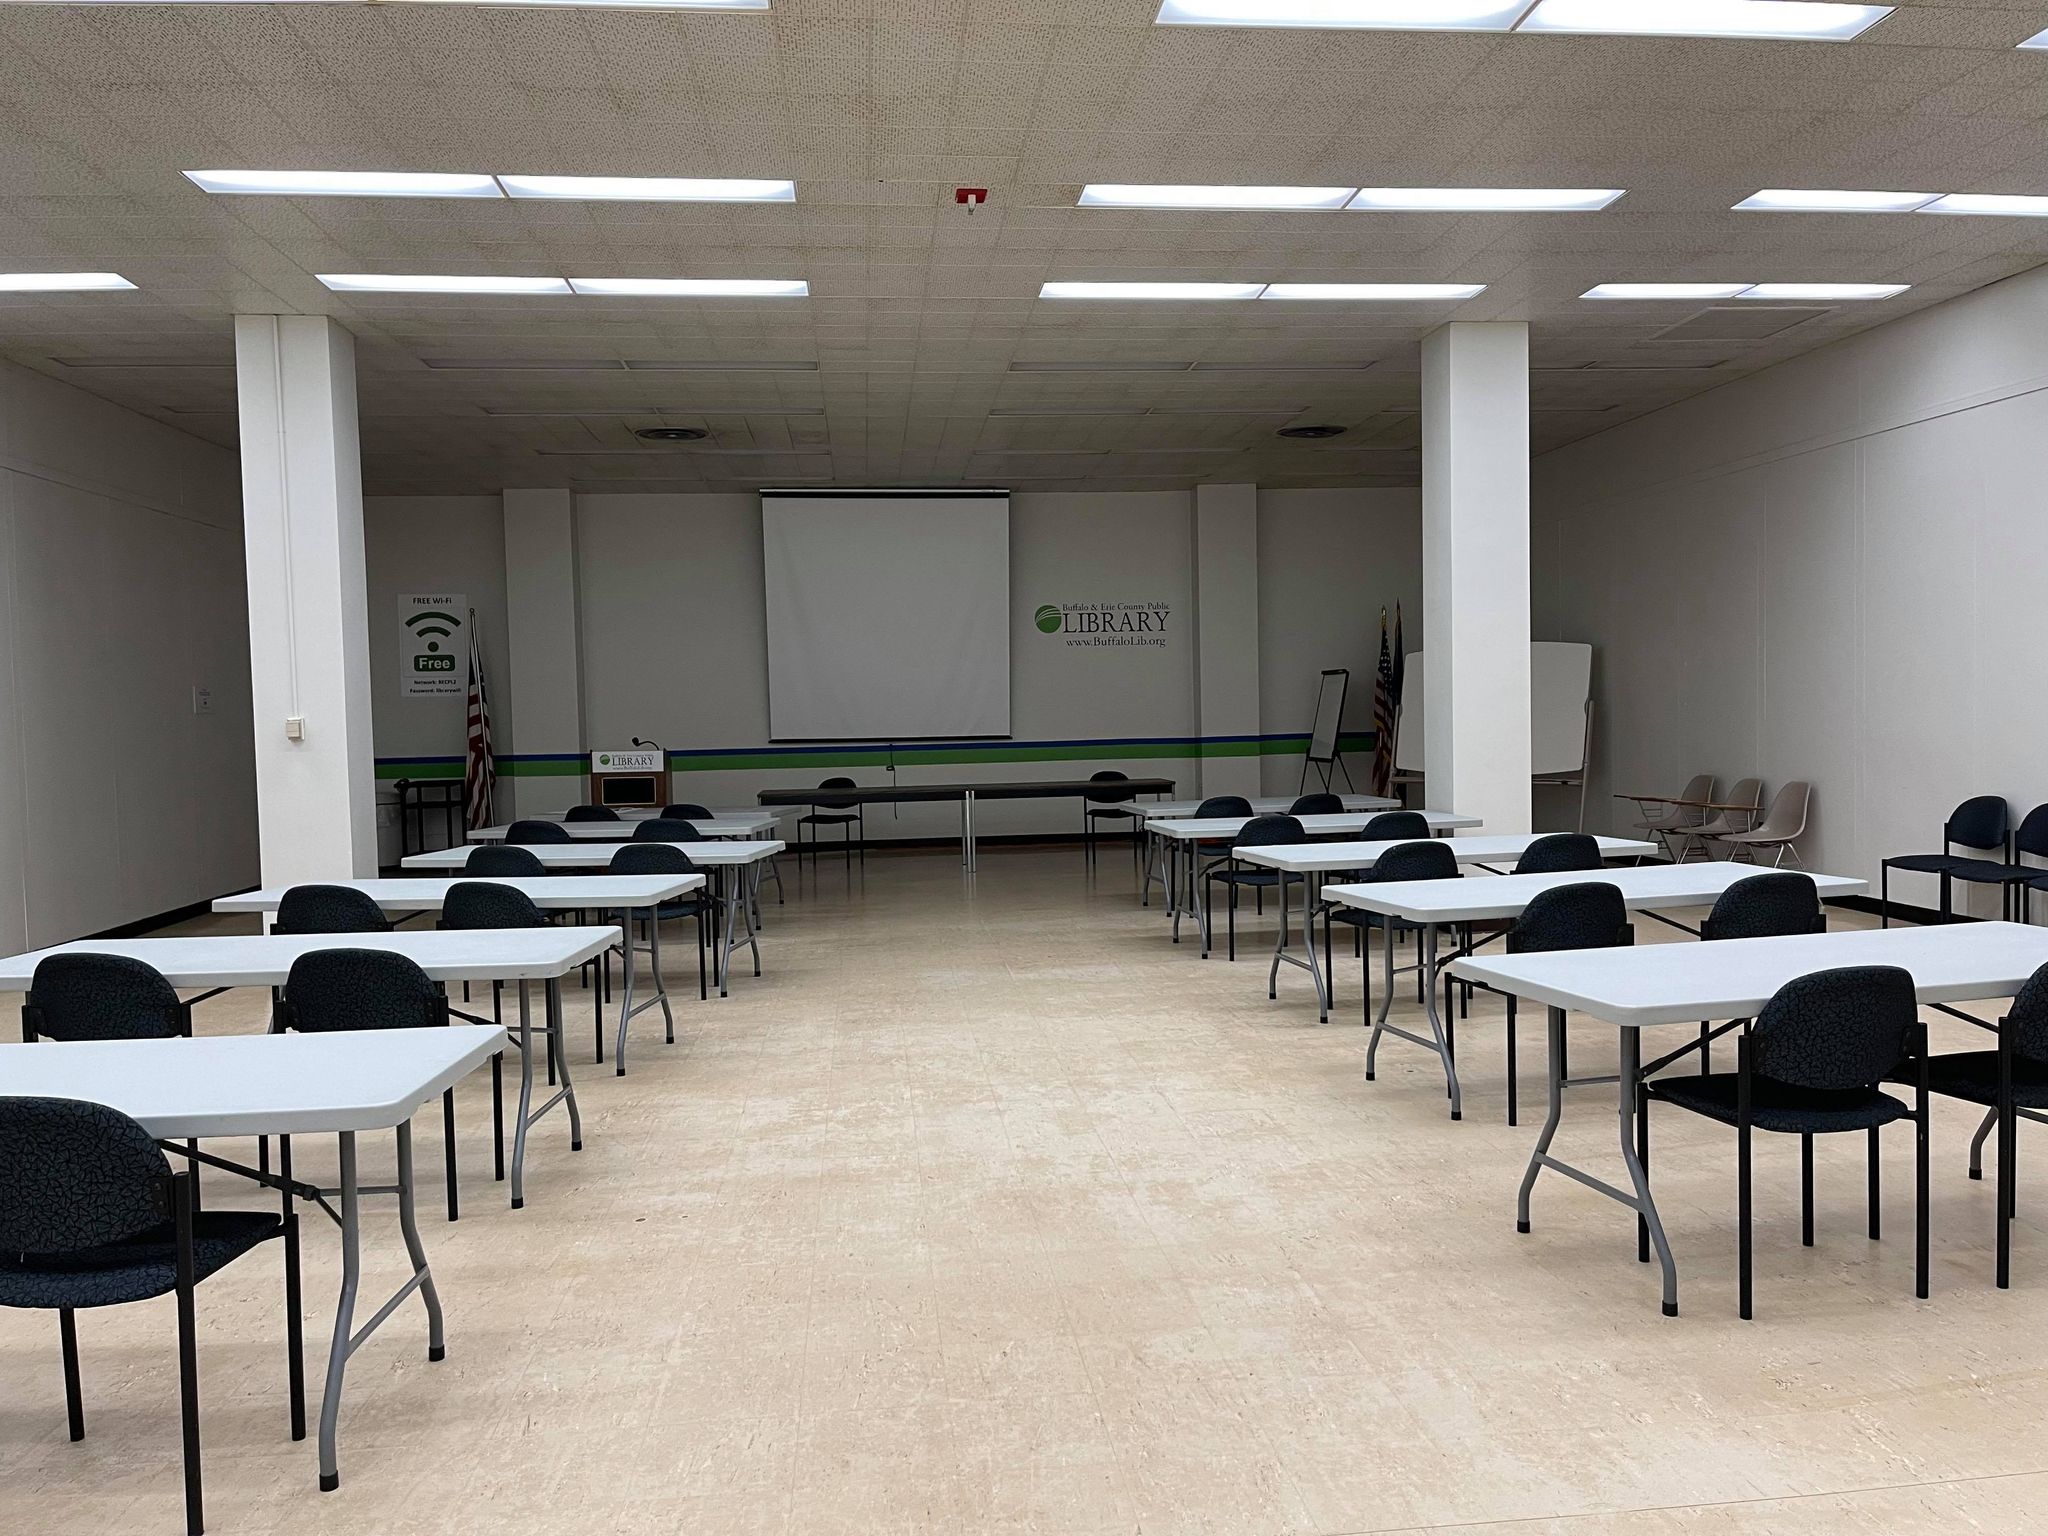 Downtown Central Library – Central Meeting Room